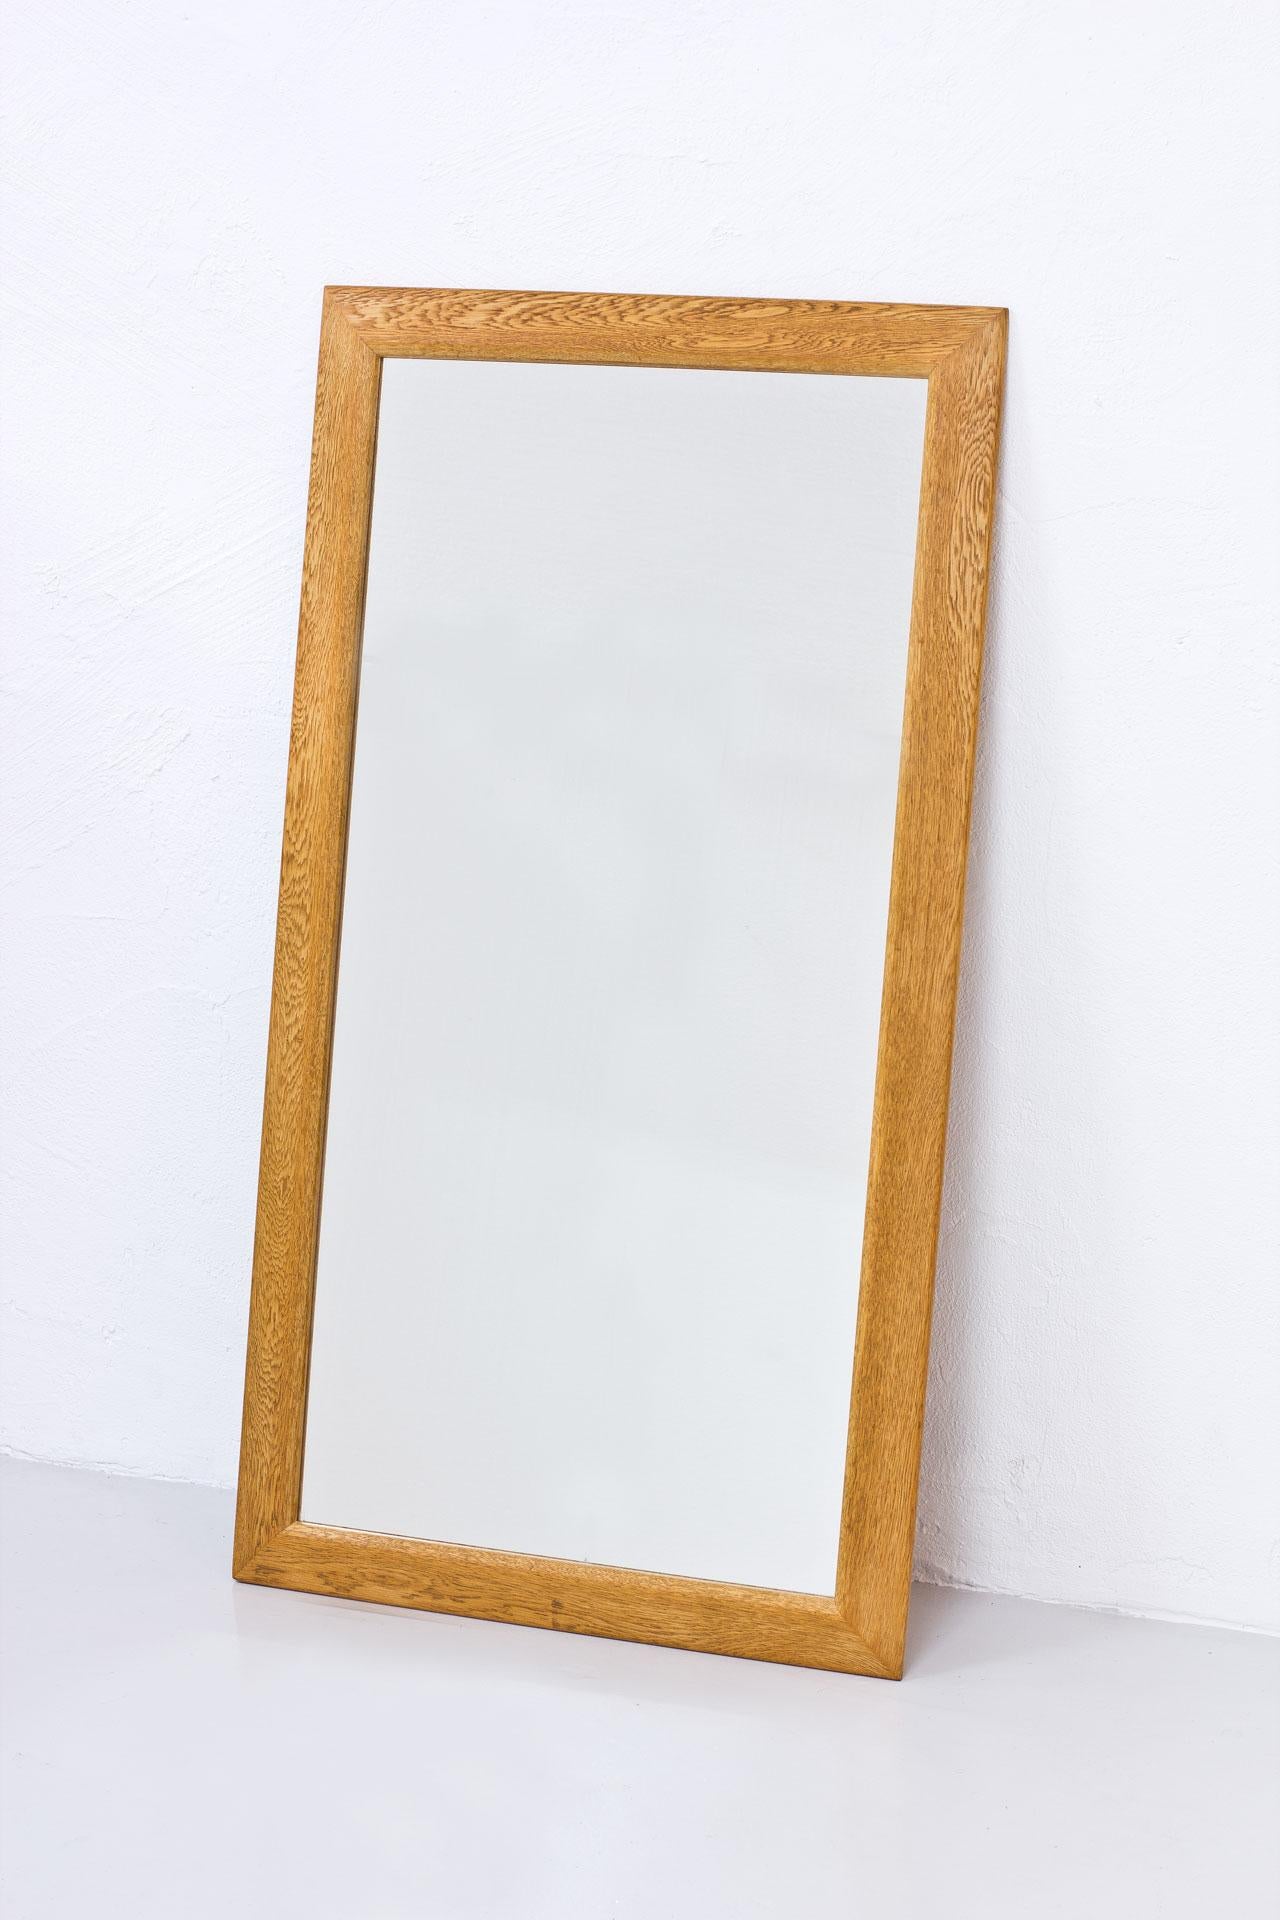 Large oak wall mirror, manufactured
by Fröseke AB Nybrofabriken in
Sweden during the 1950s. Oak frame.